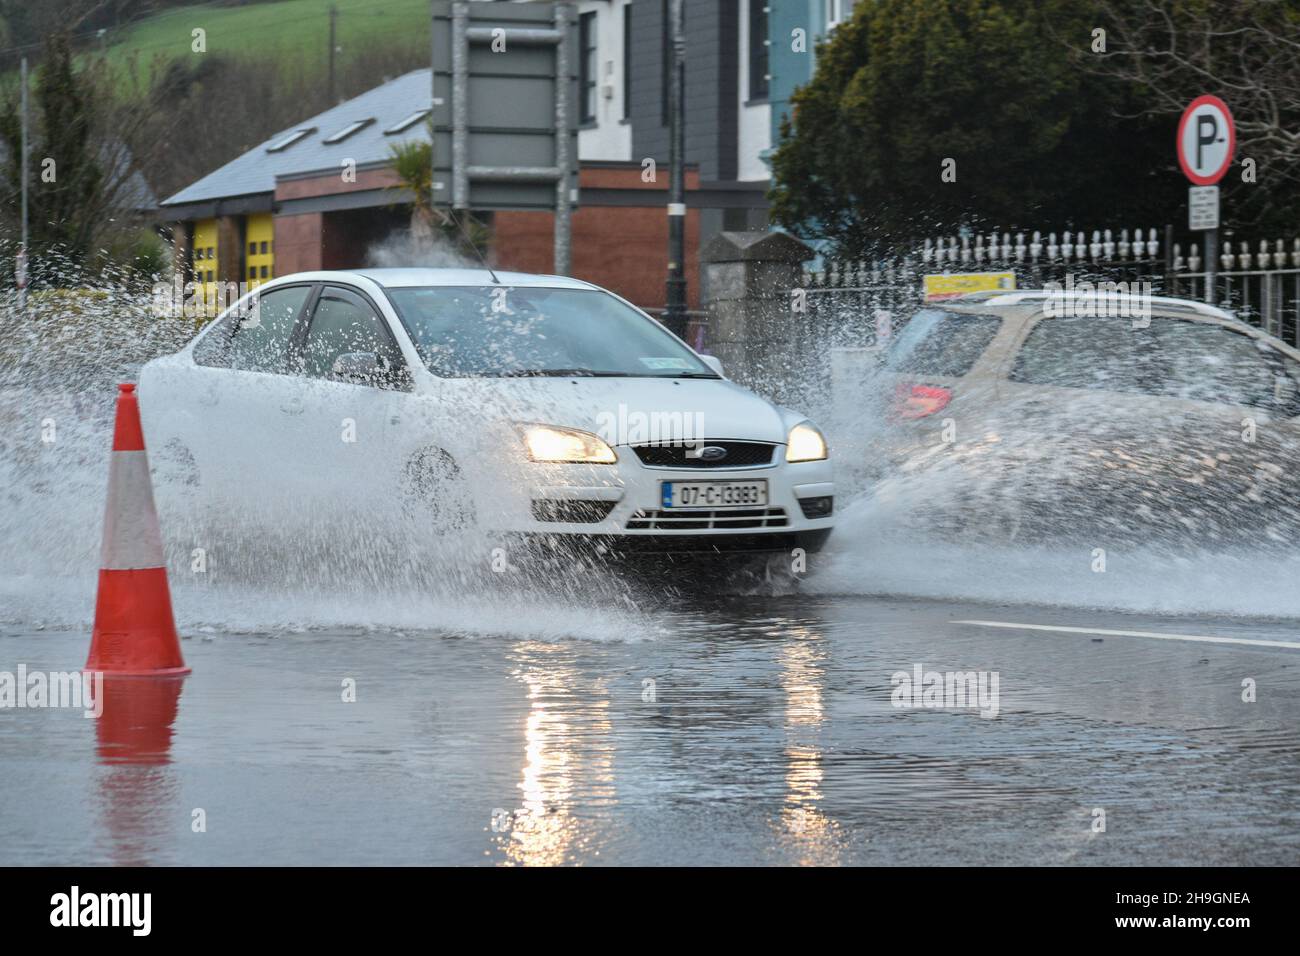 Bantry, West Cork, Ireland. 7th Dec, 2021. Bantry encounters yet another flooding, Cork County Council and Bantry Fire Brigade were on scene to prevent flooding even more. Pictured below are vehicles driving through floodwaters. Credit: Karlis Dzjamko/Alamy Live News Stock Photo